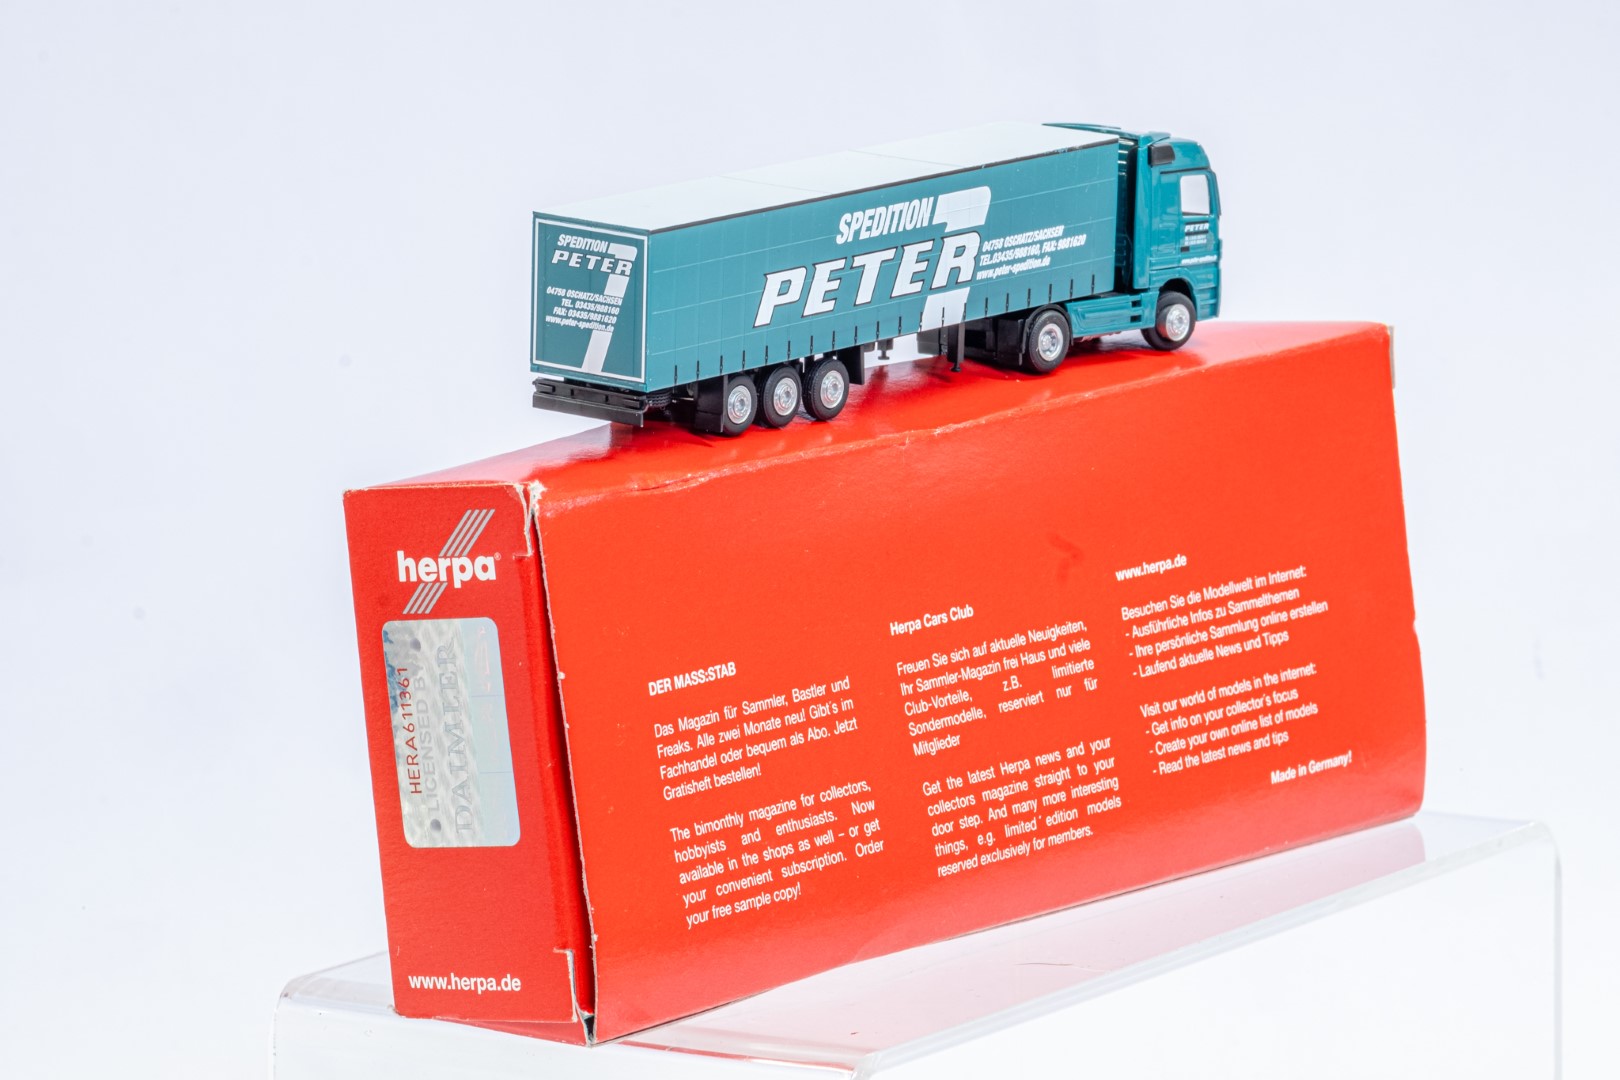 Herpa Merc Actros Box Trailer - Peter Spedition - Image 4 of 8